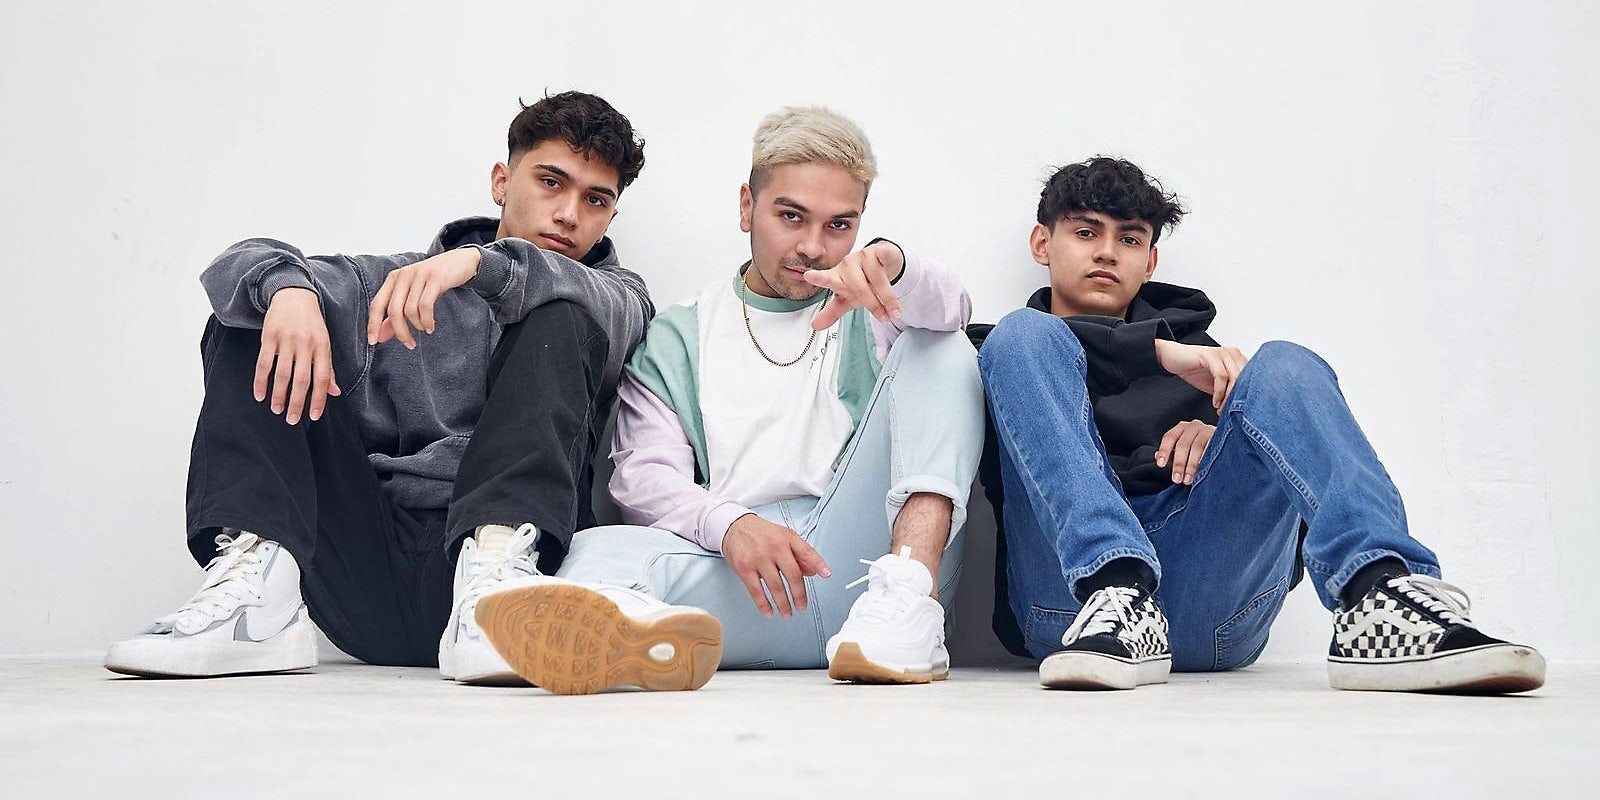 Three guys sitting on the floor and looking into camera.